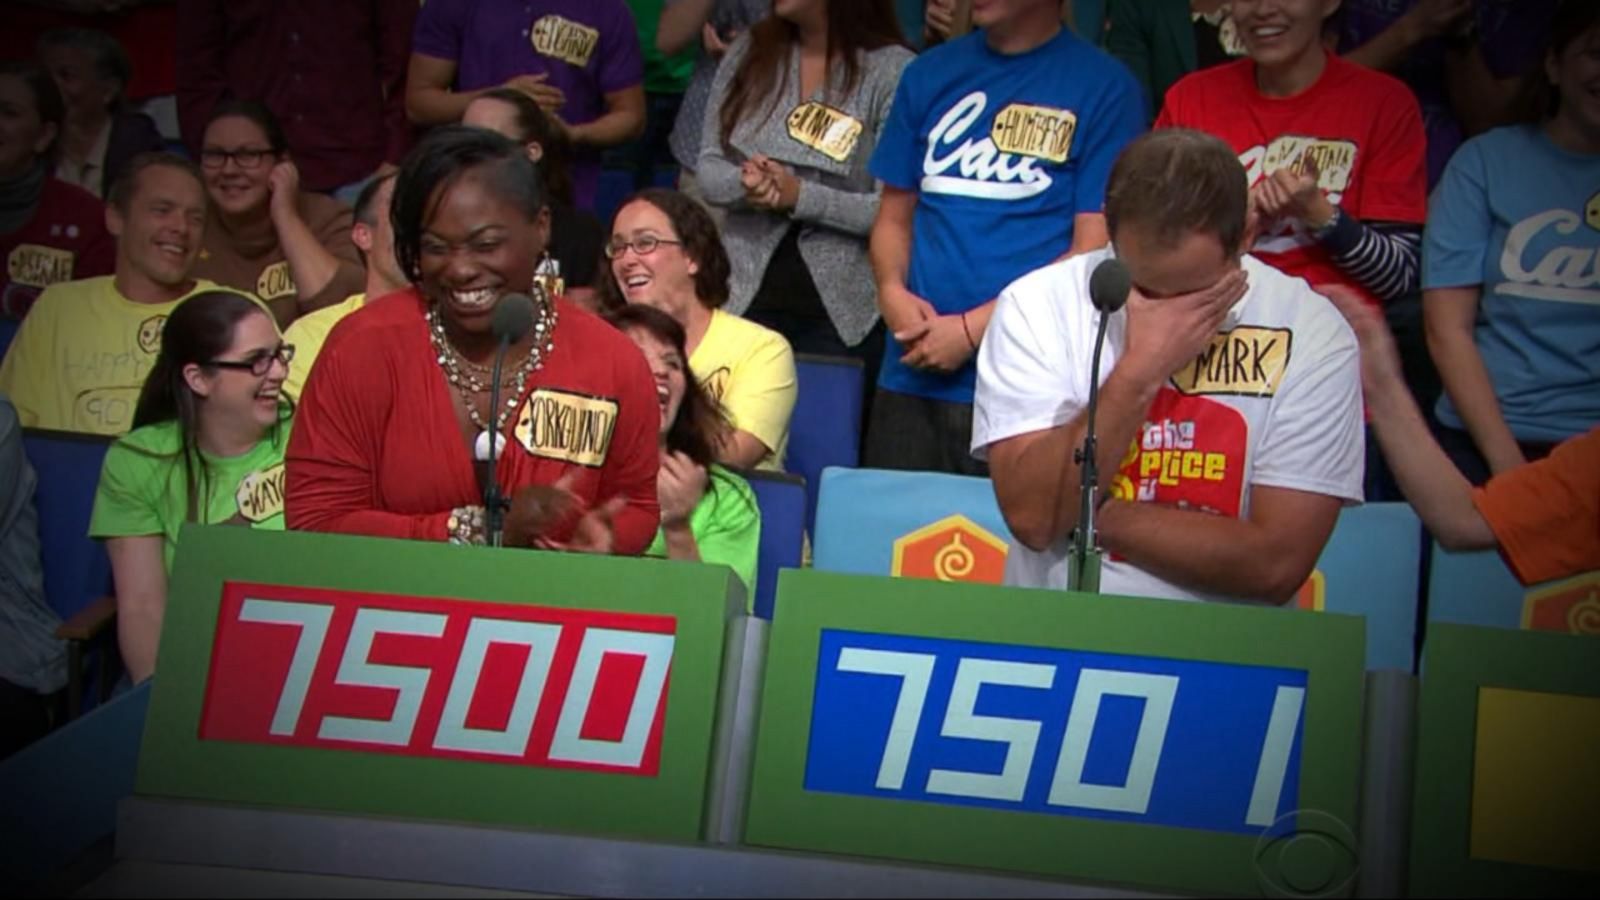 Epic Game Show Fails - Good Morning America